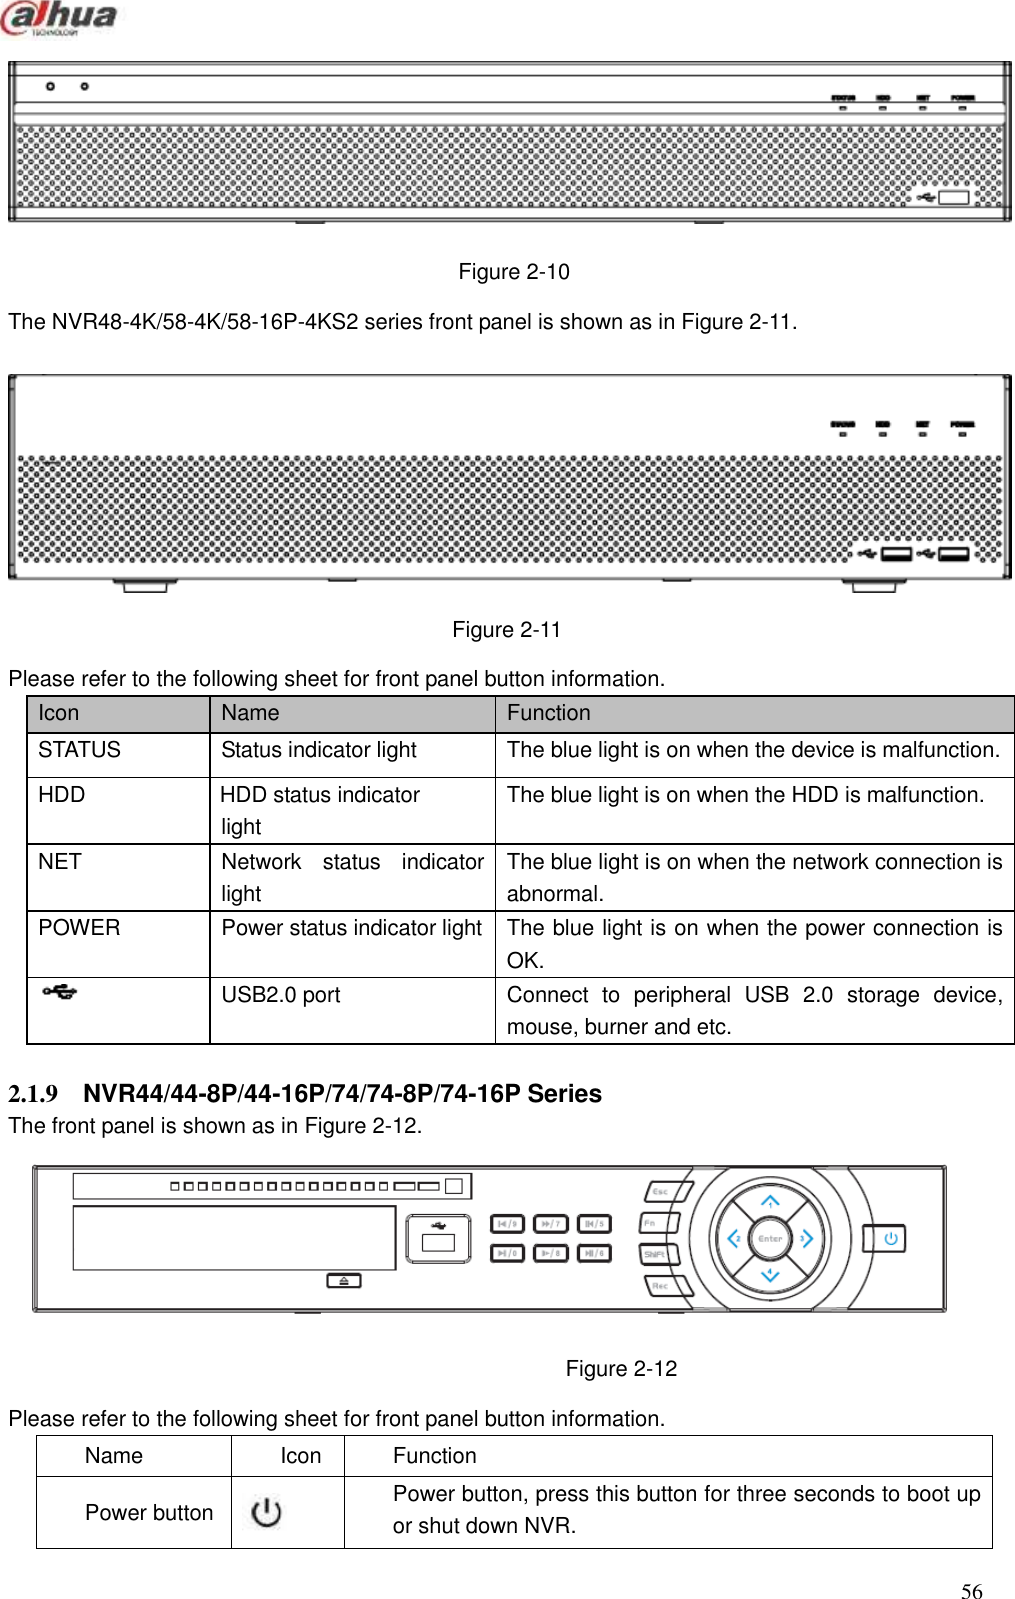  56   Figure 2-10 The NVR48-4K/58-4K/58-16P-4KS2 series front panel is shown as in Figure 2-11.   Figure 2-11 Please refer to the following sheet for front panel button information. Icon Name Function   STATUS Status indicator light   The blue light is on when the device is malfunction.   HDD HDD status indicator light   The blue light is on when the HDD is malfunction.   NET Network  status  indicator light   The blue light is on when the network connection is abnormal.   POWER Power status indicator light   The blue light is on when the power connection is OK.    USB2.0 port   Connect  to  peripheral  USB  2.0  storage  device, mouse, burner and etc.    2.1.9  NVR44/44-8P/44-16P/74/74-8P/74-16P Series   The front panel is shown as in Figure 2-12.    Figure 2-12 Please refer to the following sheet for front panel button information. Name Icon Function Power button  Power button, press this button for three seconds to boot up or shut down NVR.   